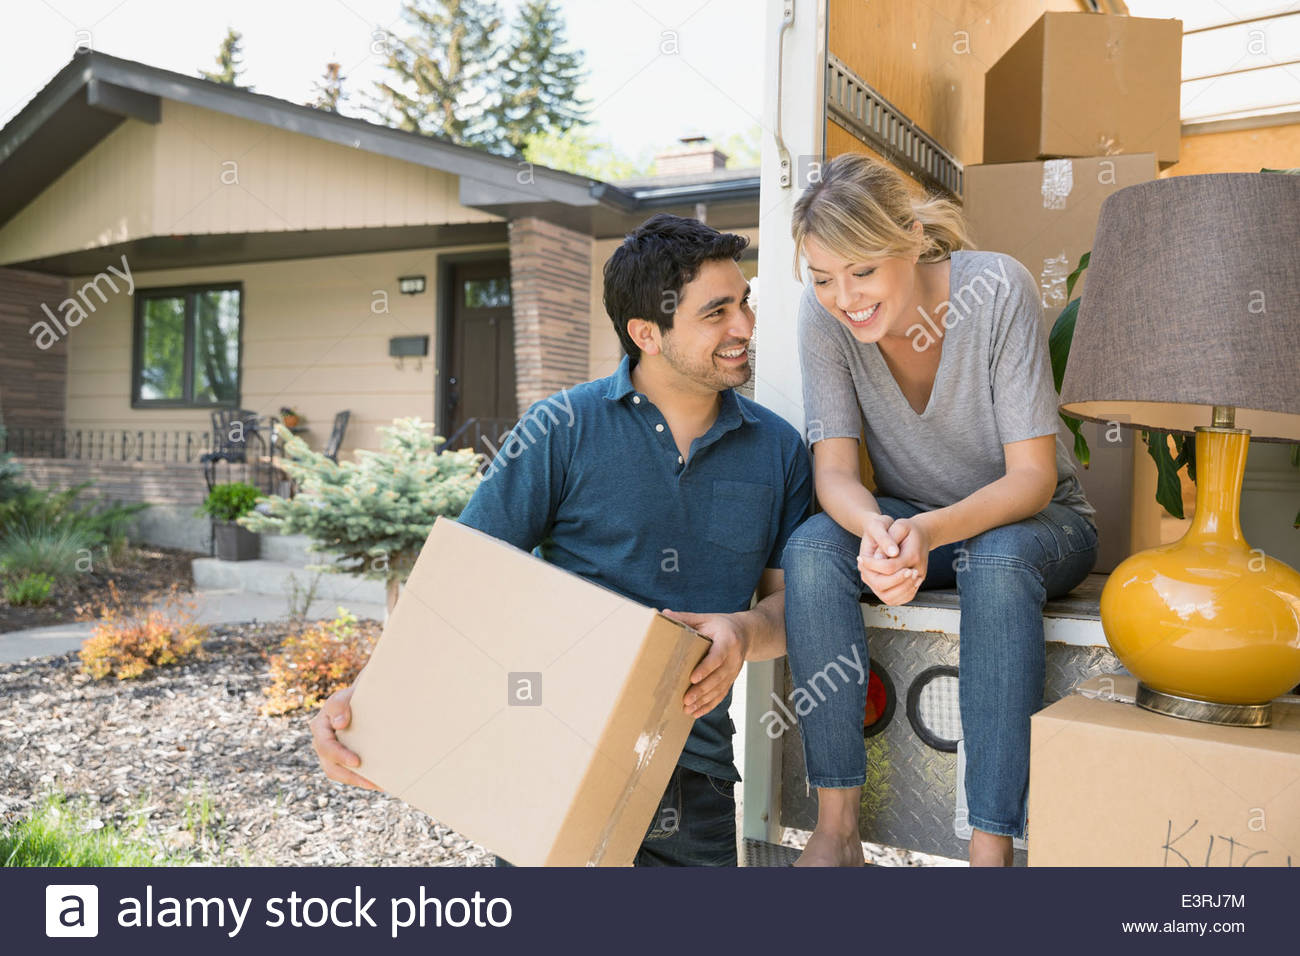 Couple talking at back of moving van Stock Photo